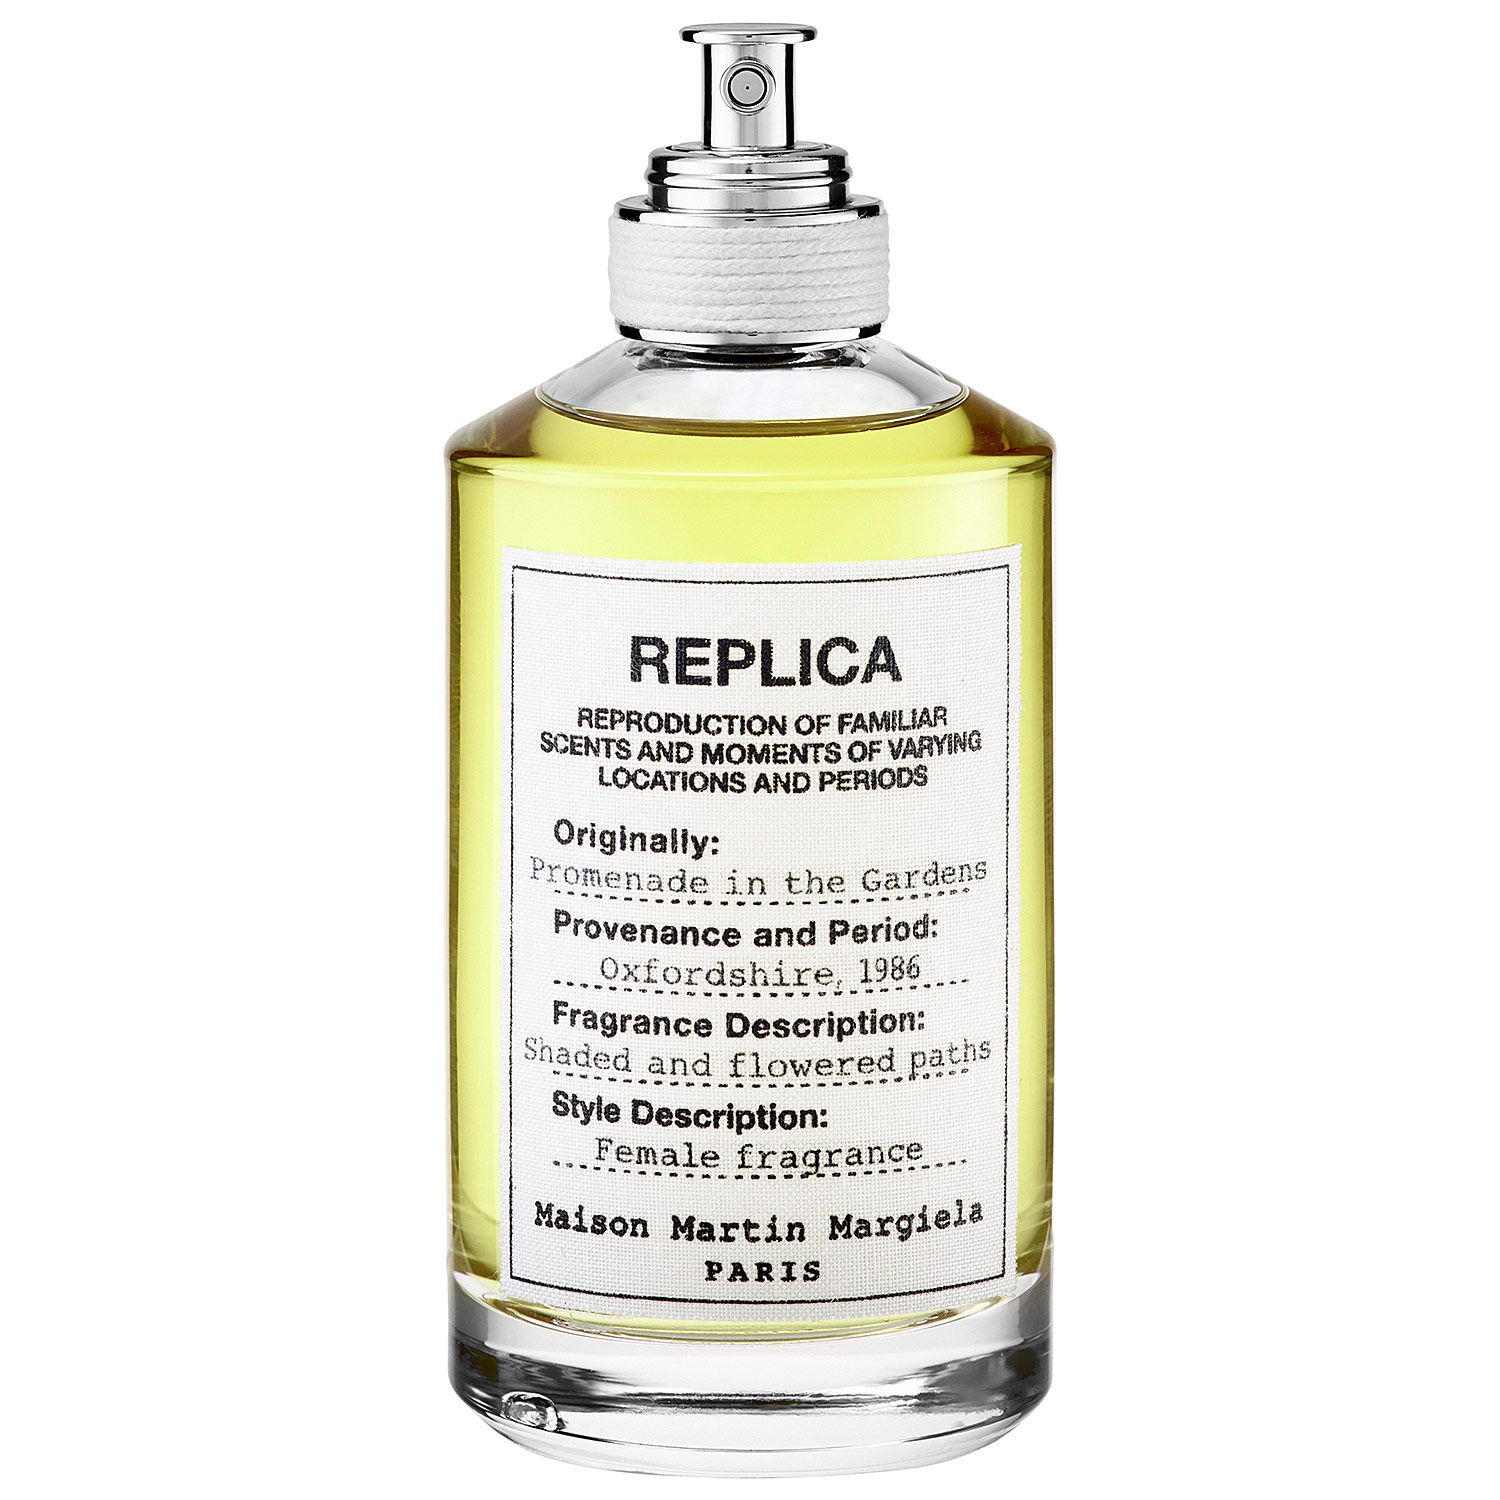 Maison Margiela Replica by the Fireplace Lovely This Floral Scent Bines the Intense Femininity Of Turkish